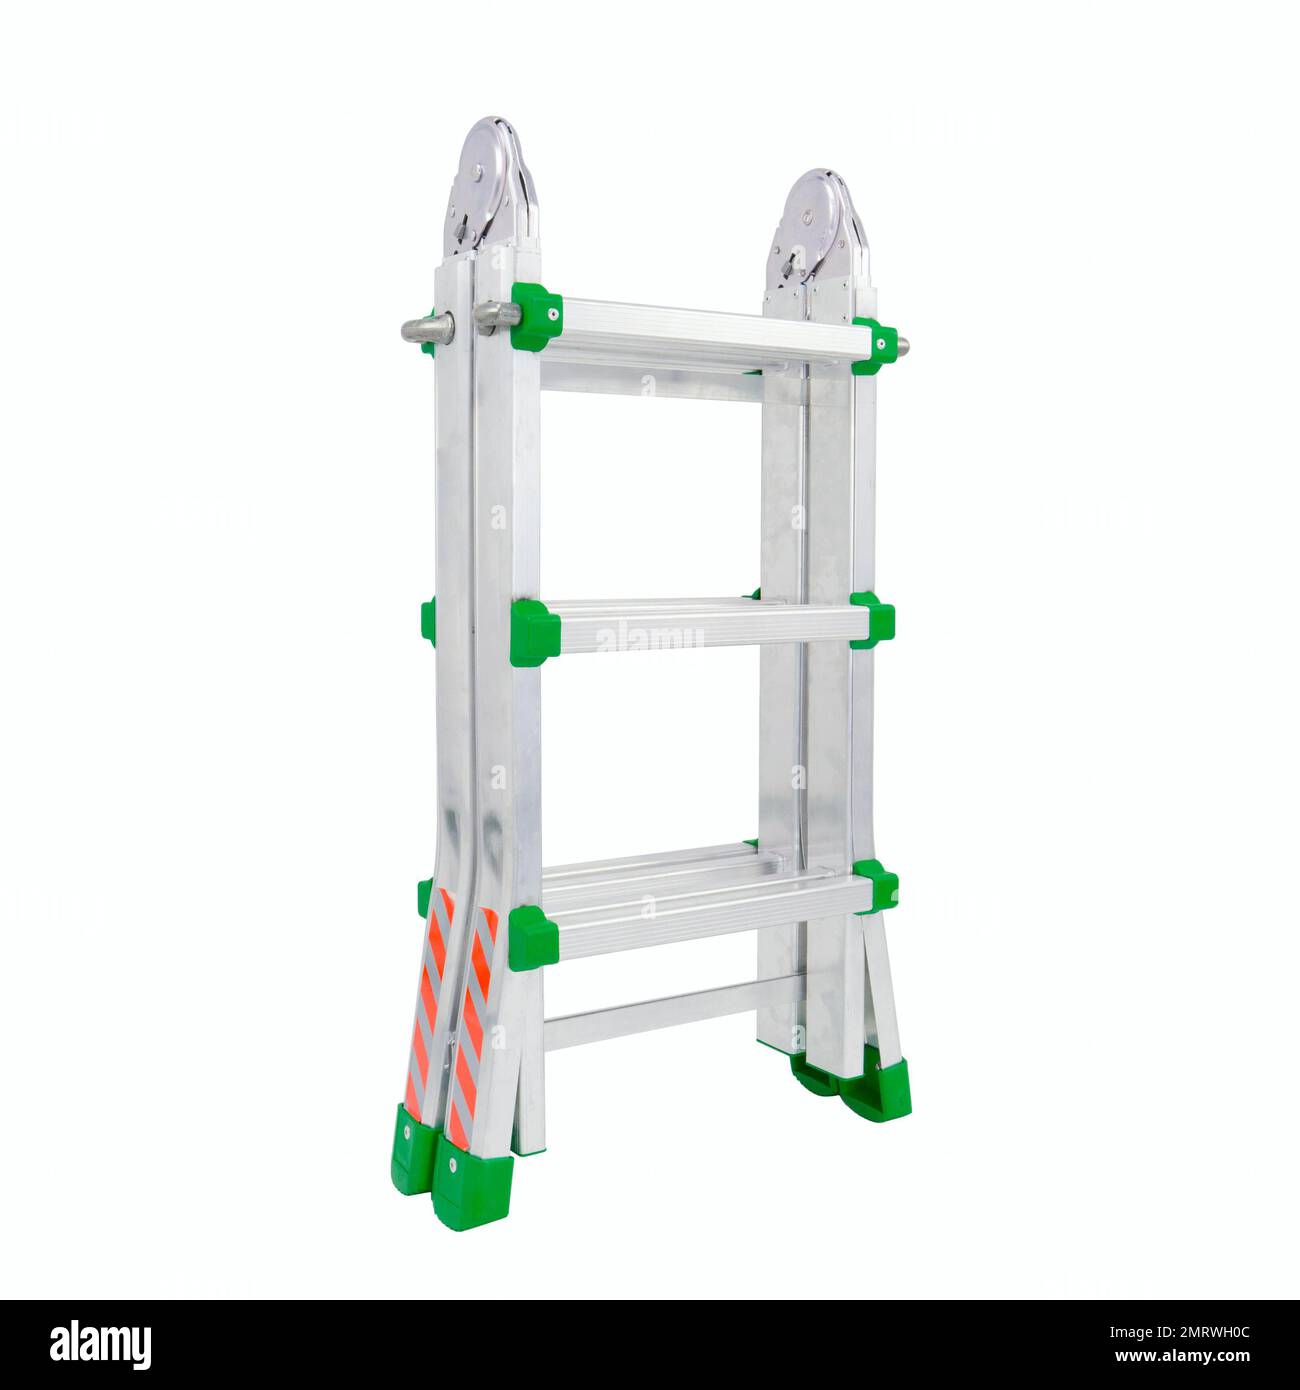 Aluminium stepladder isolated on white background. Portable ladder in a studio setting. An easy and reliable tool for performing installation work. Stock Photo